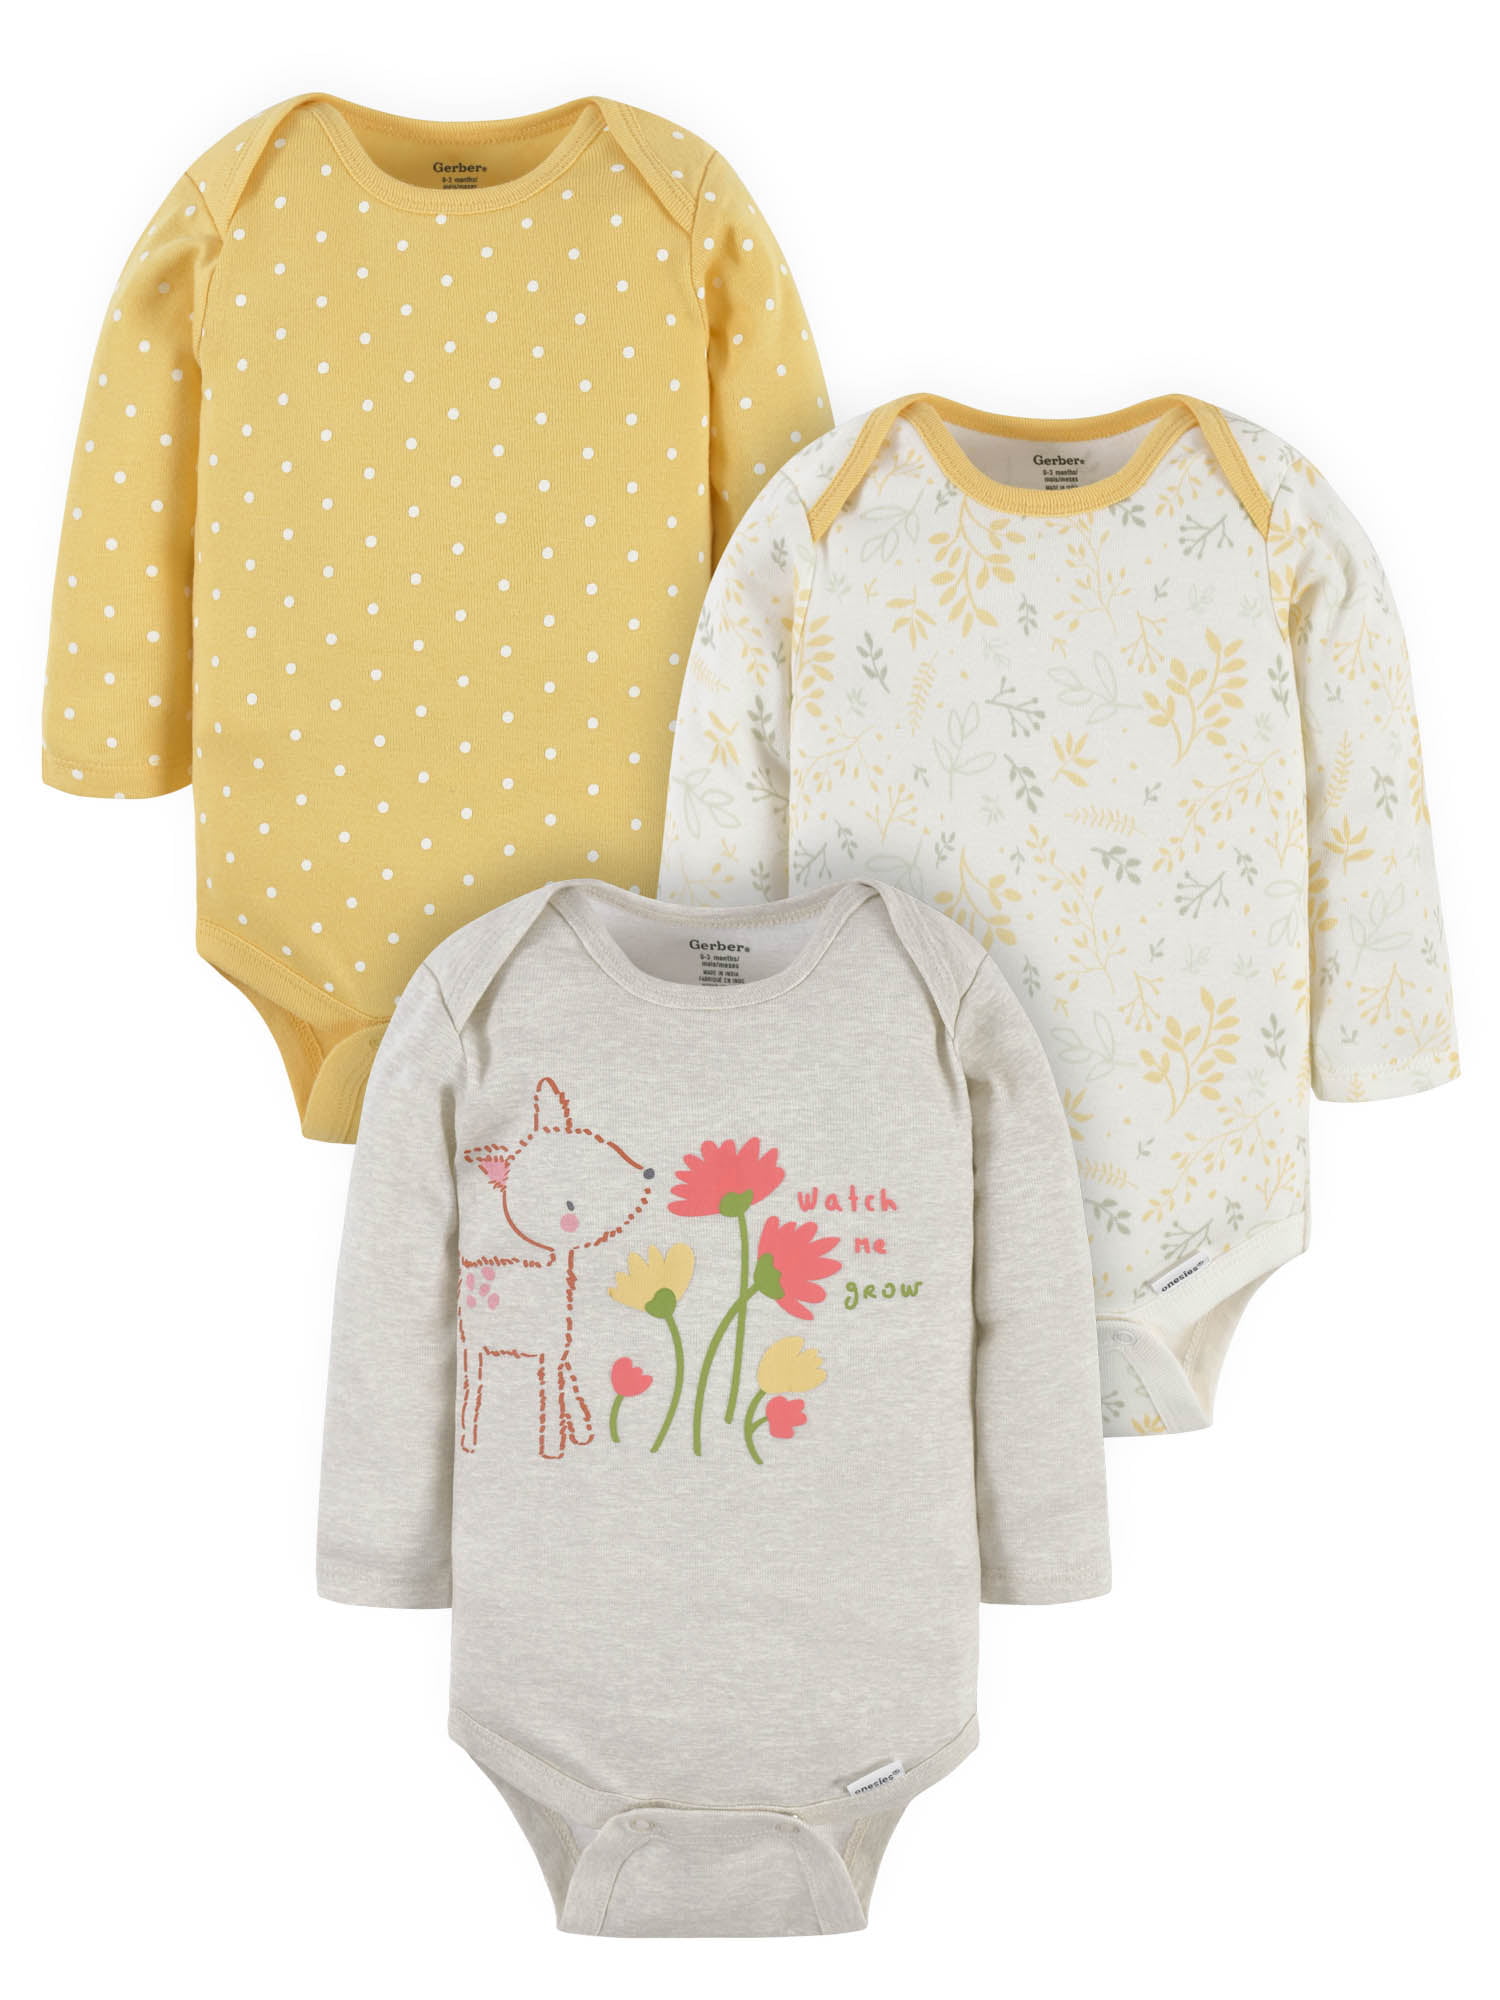 Pack of 3 Care Baby Girls Long Sleeve Top 